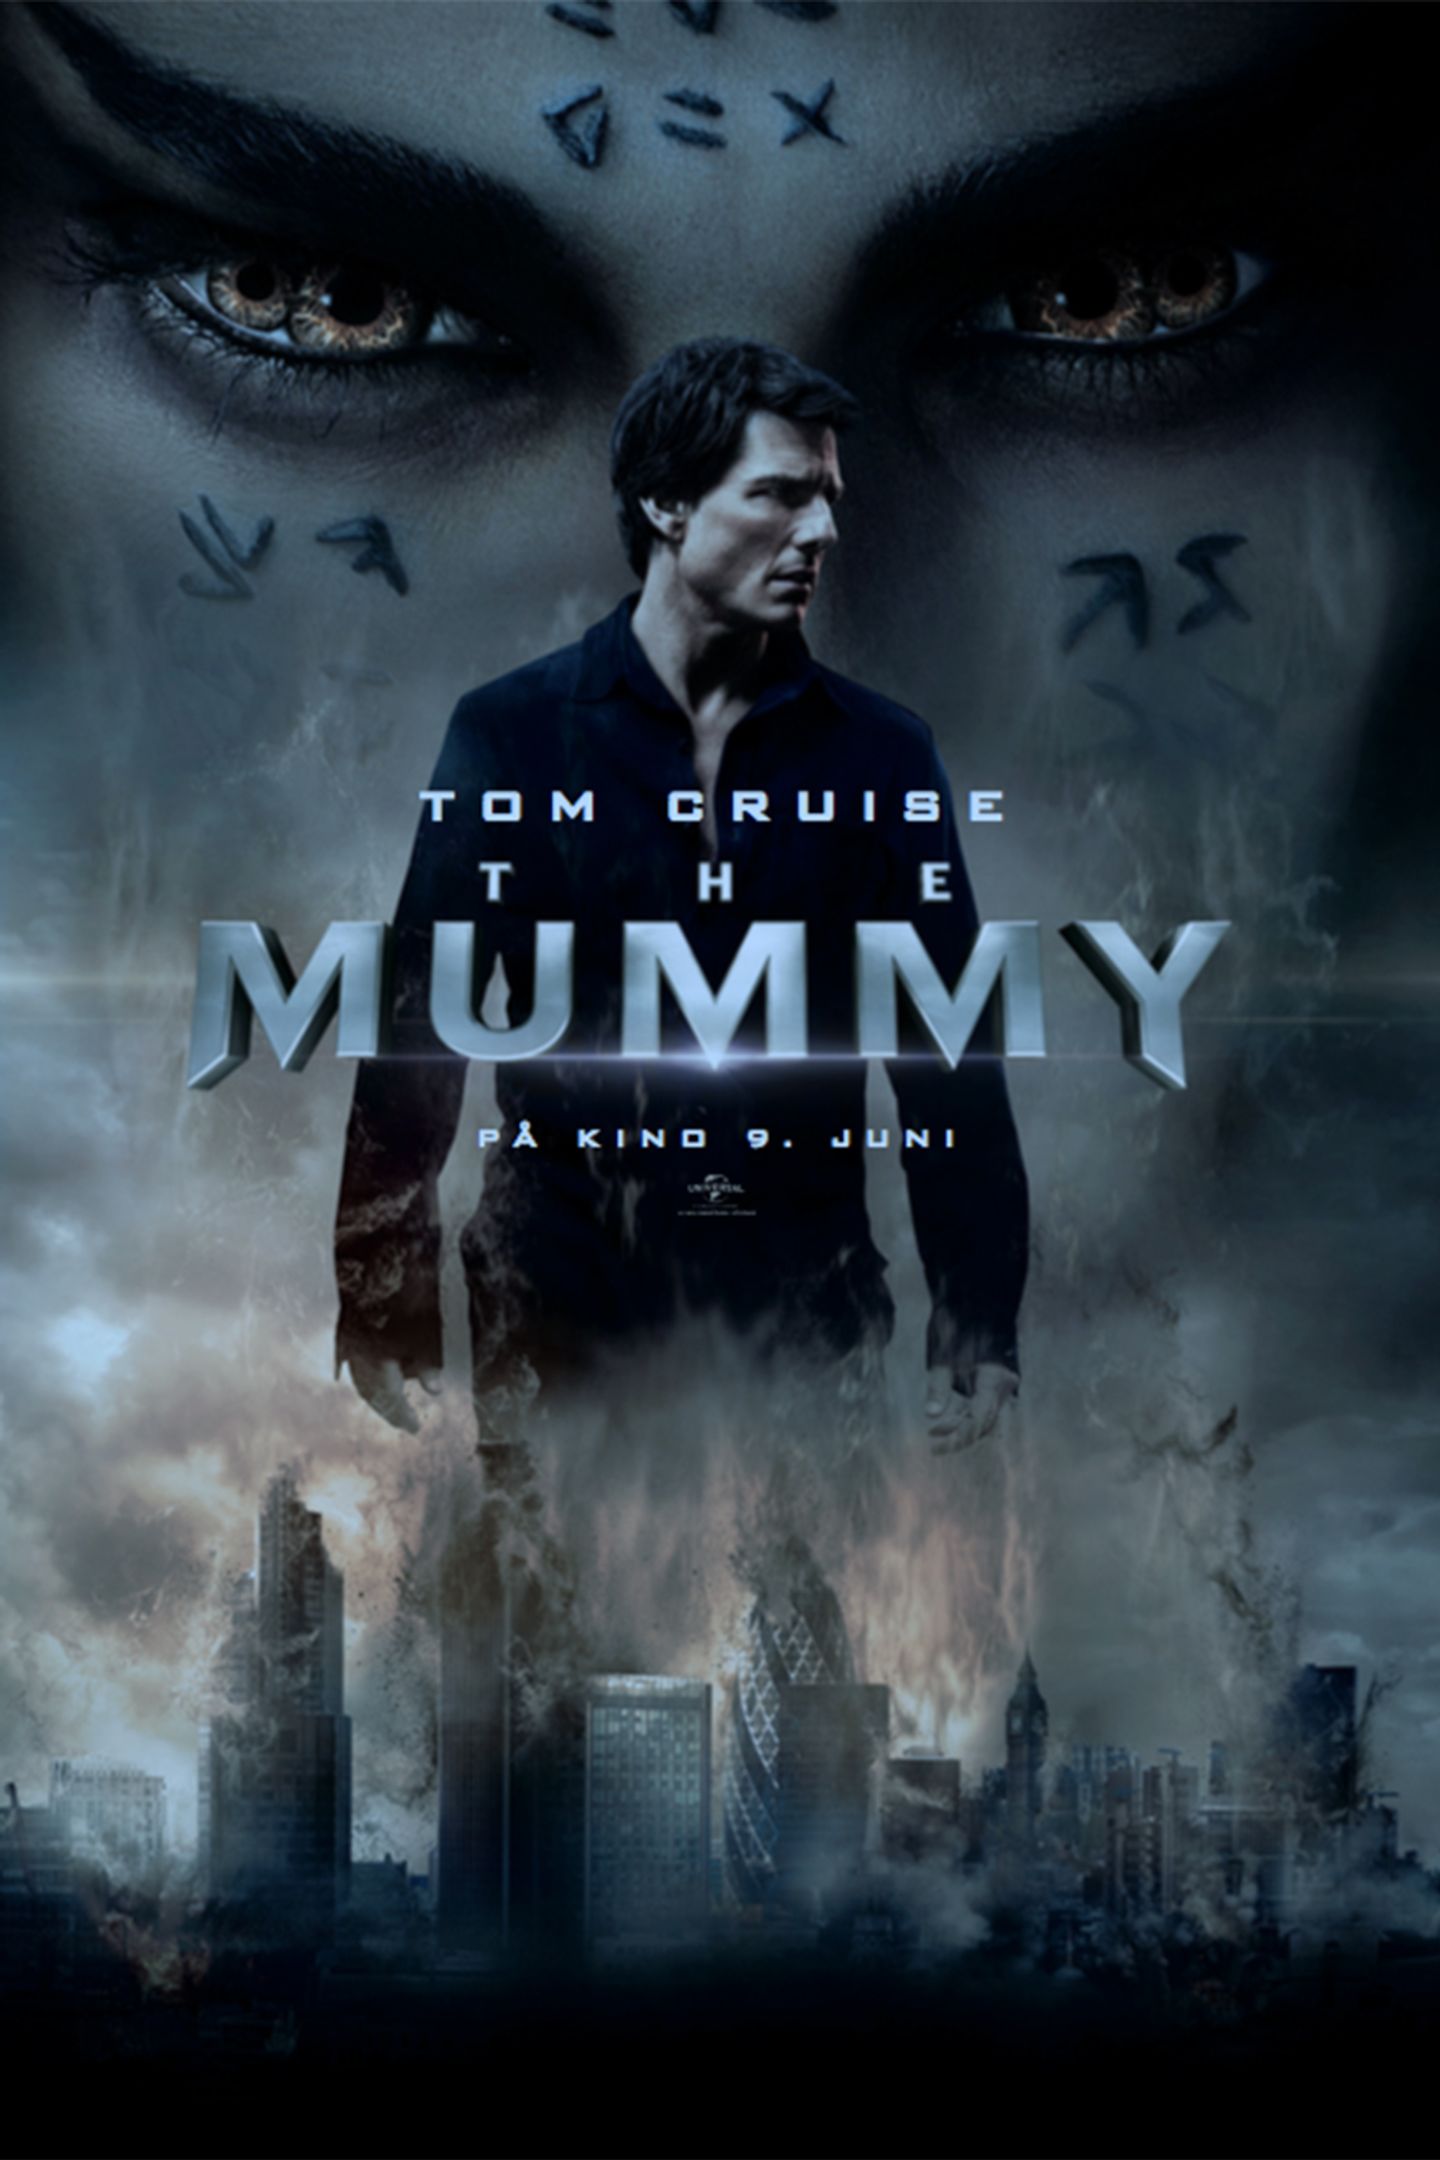 Plakat for 'The Mummy (3D)'